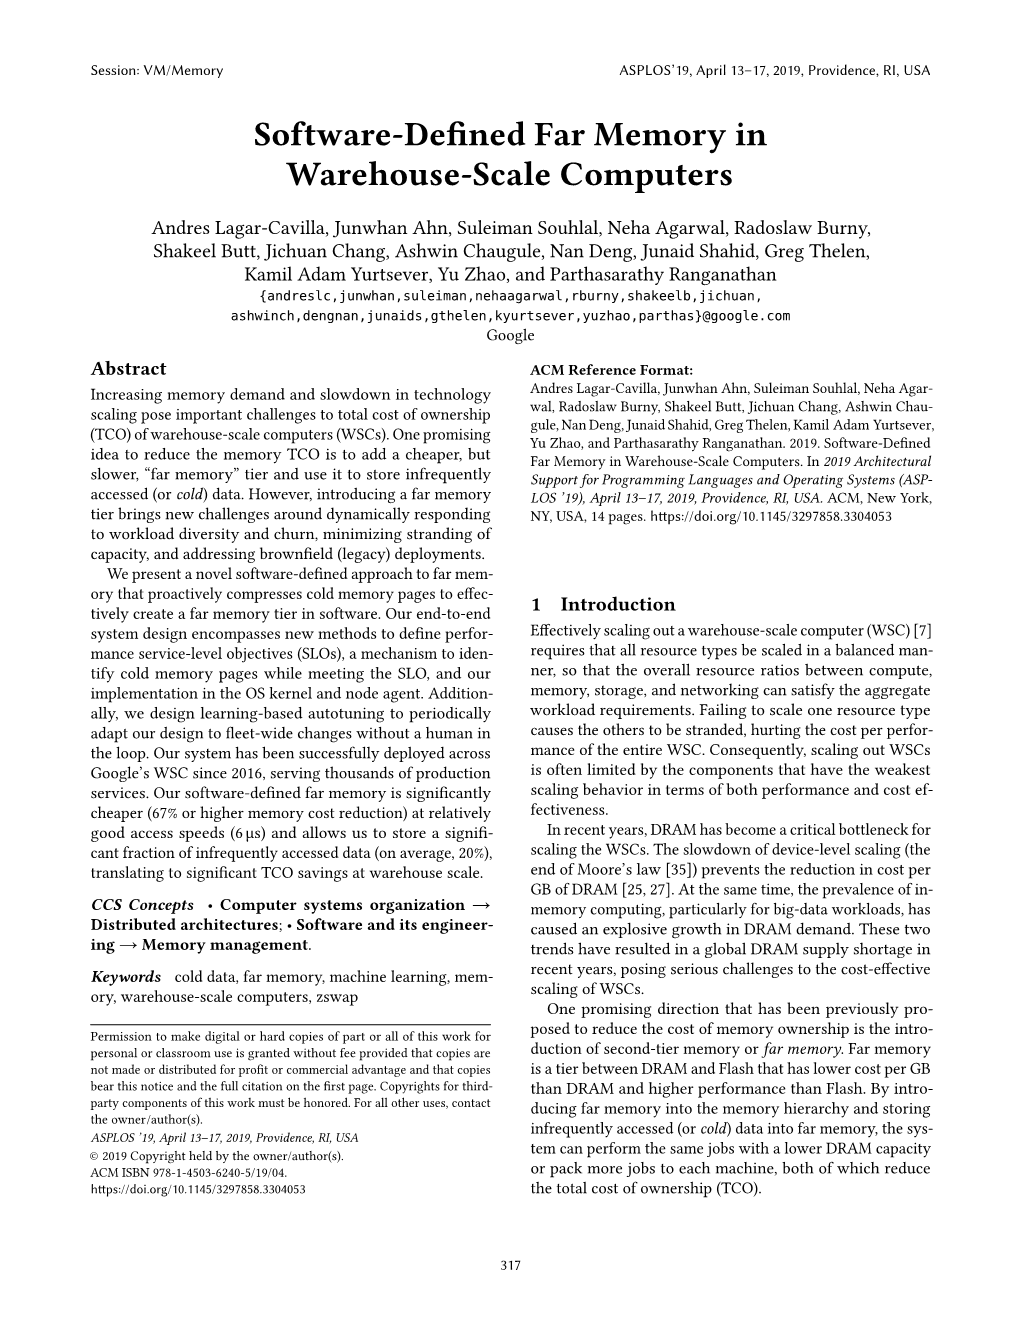 Software-Defined Far Memory in Warehouse-Scale Computers